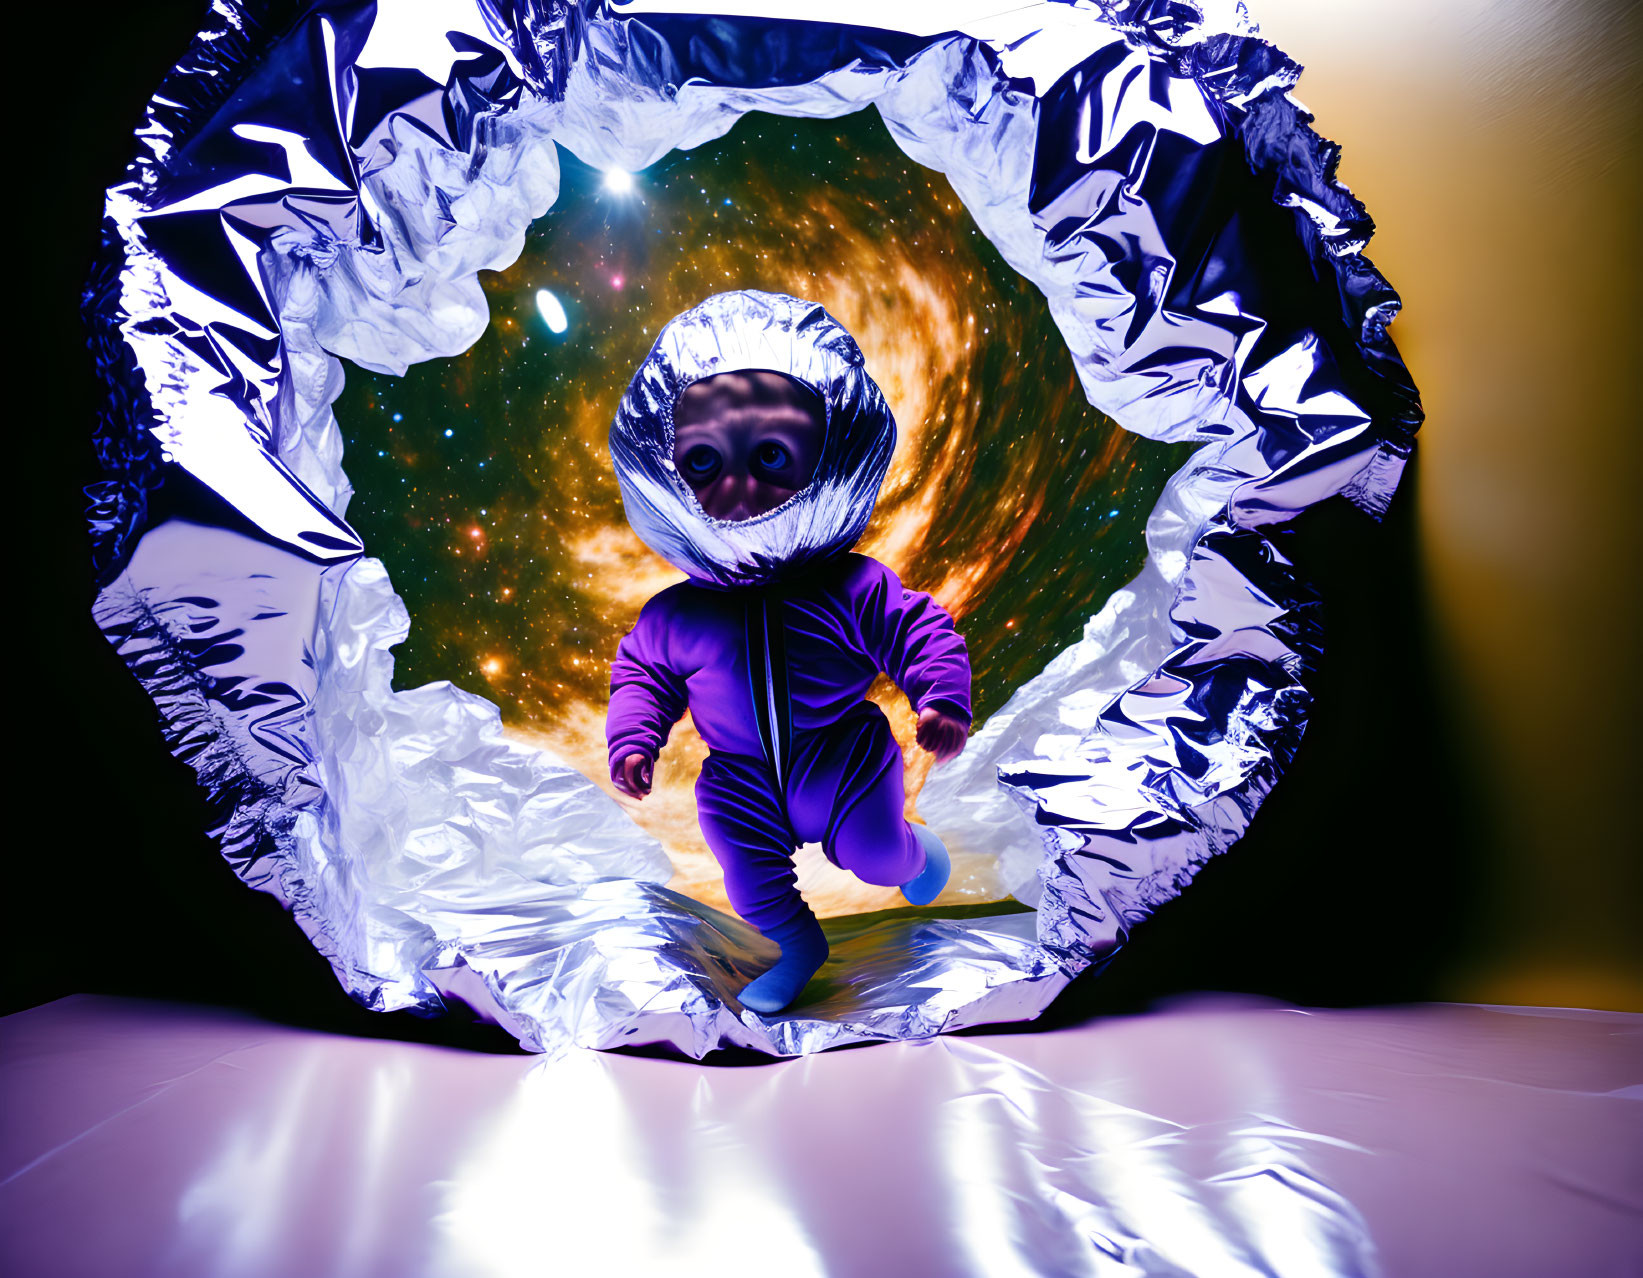 Child in spacesuit playing in space-time portal tunnel against cosmic backdrop